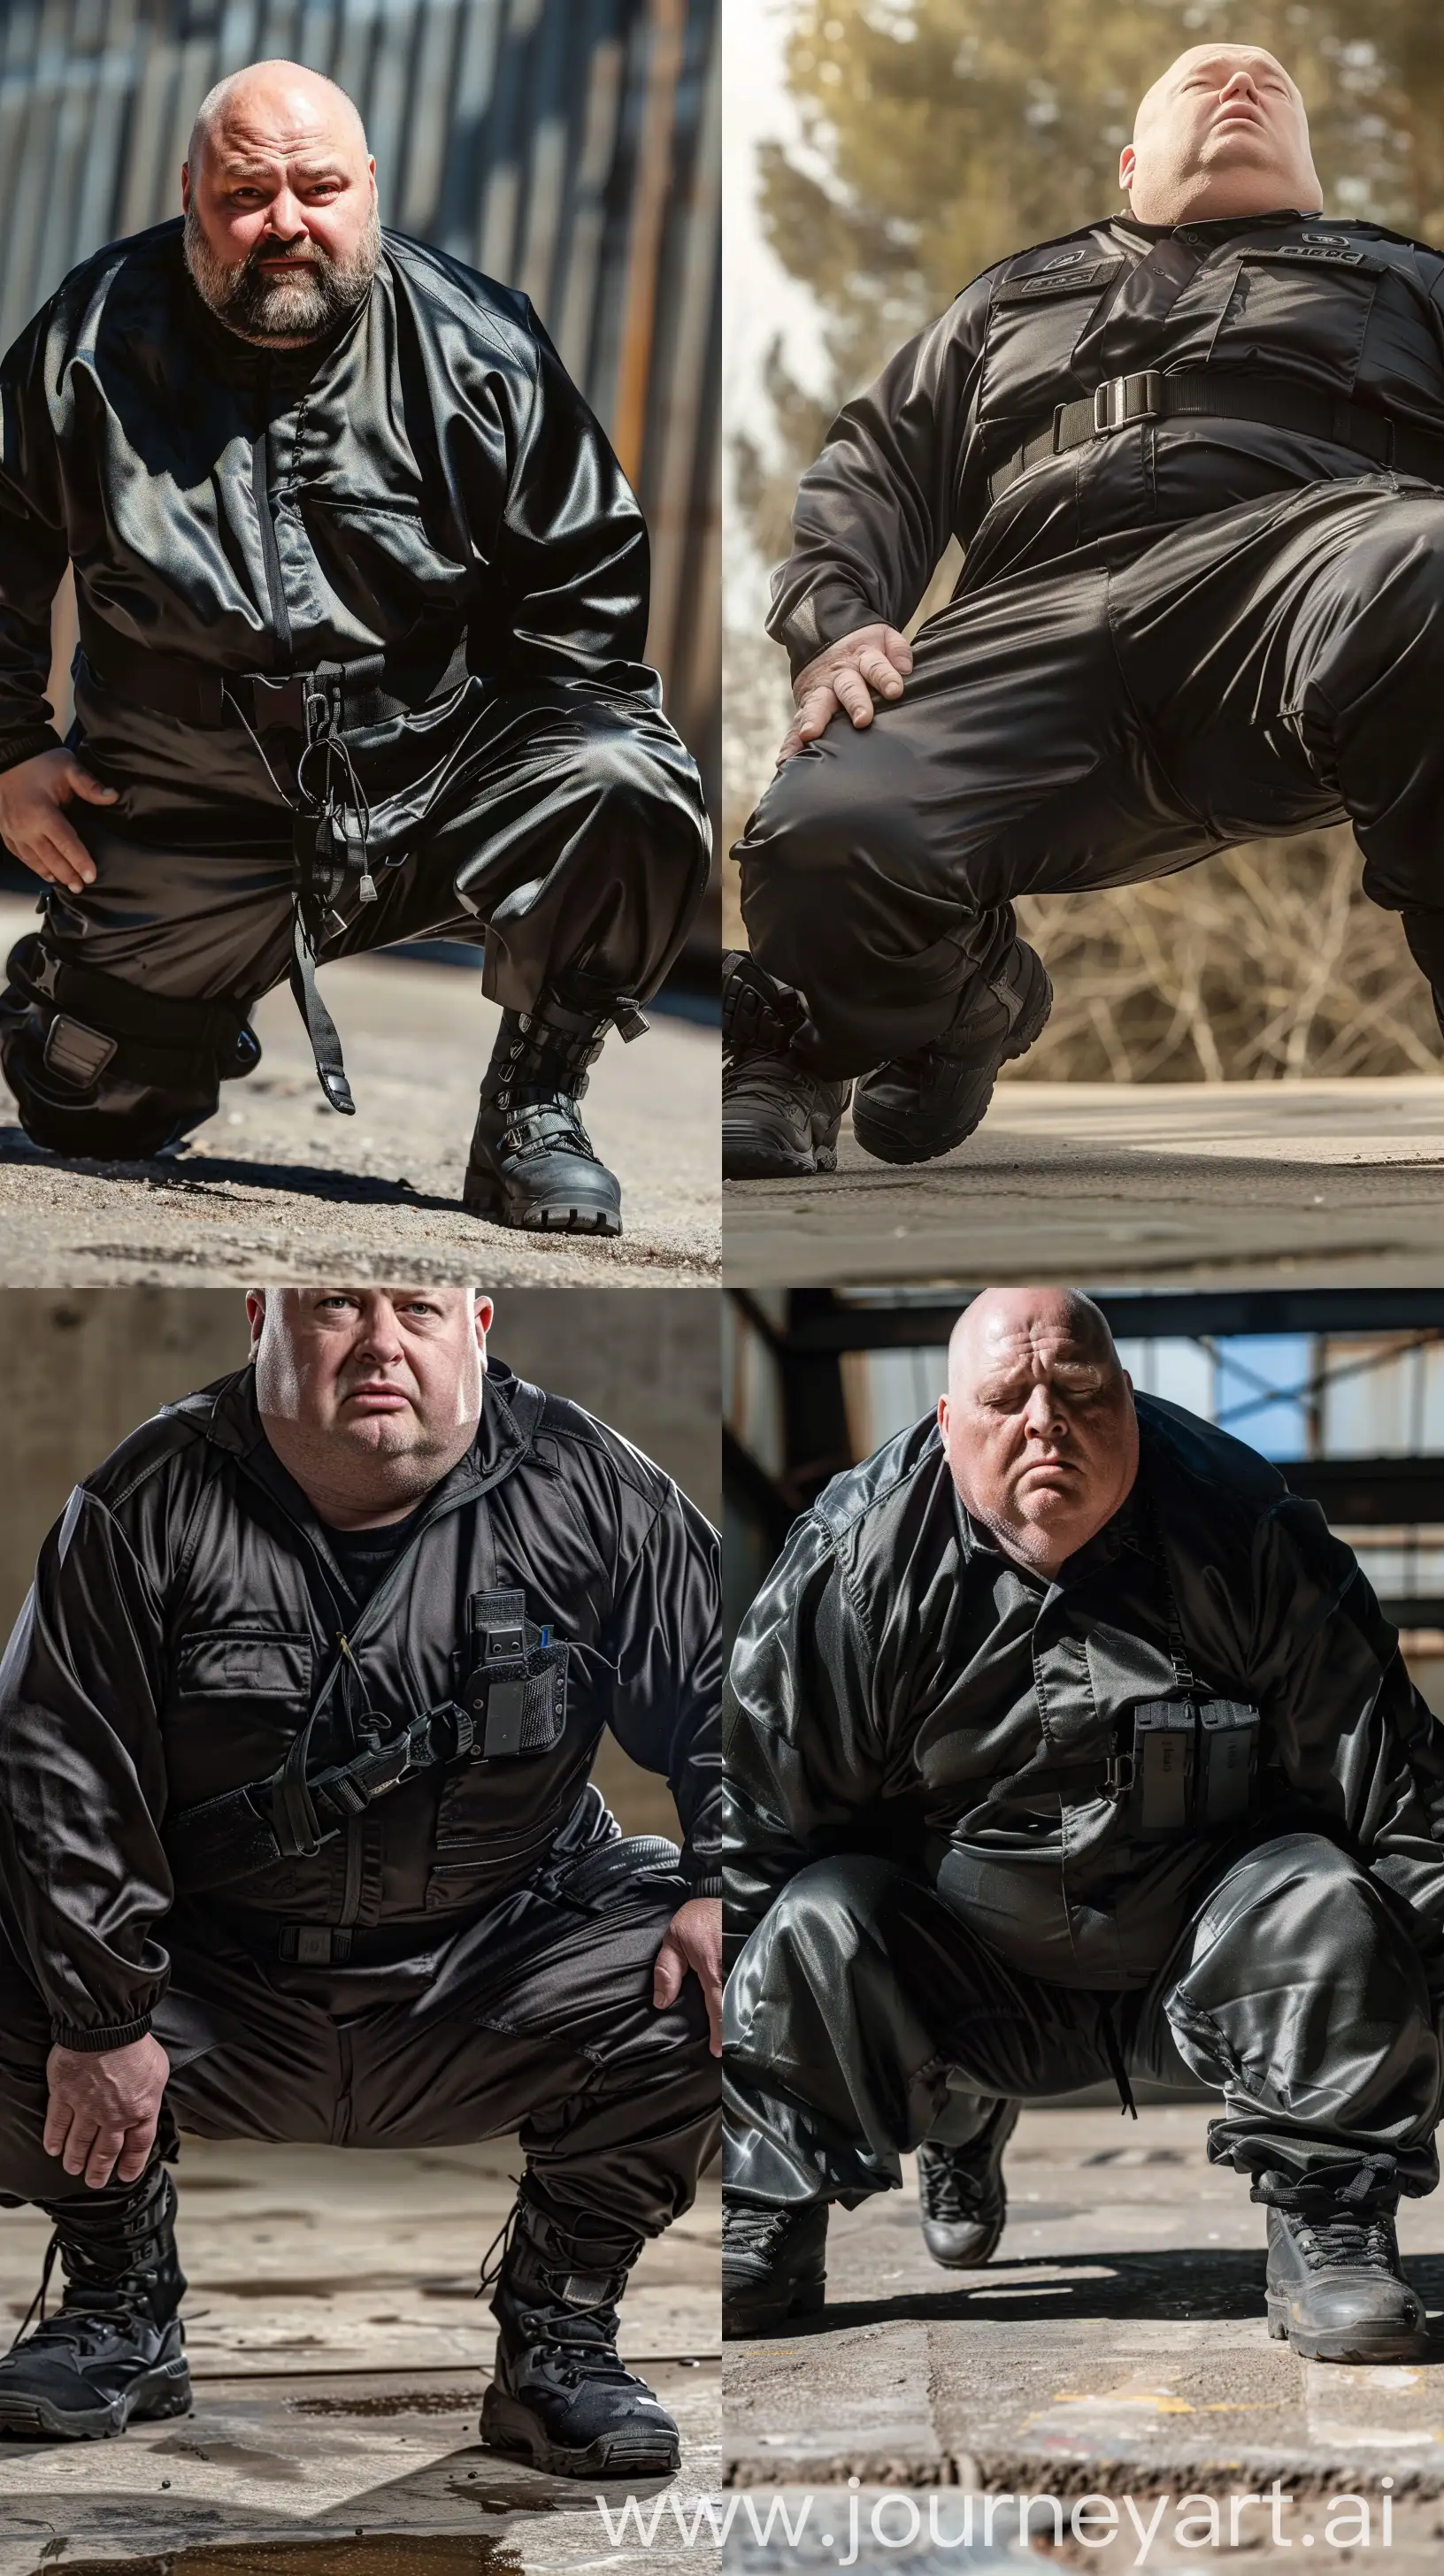 Mature-Security-Guard-in-Tactical-Gear-Kneeling-Outdoors